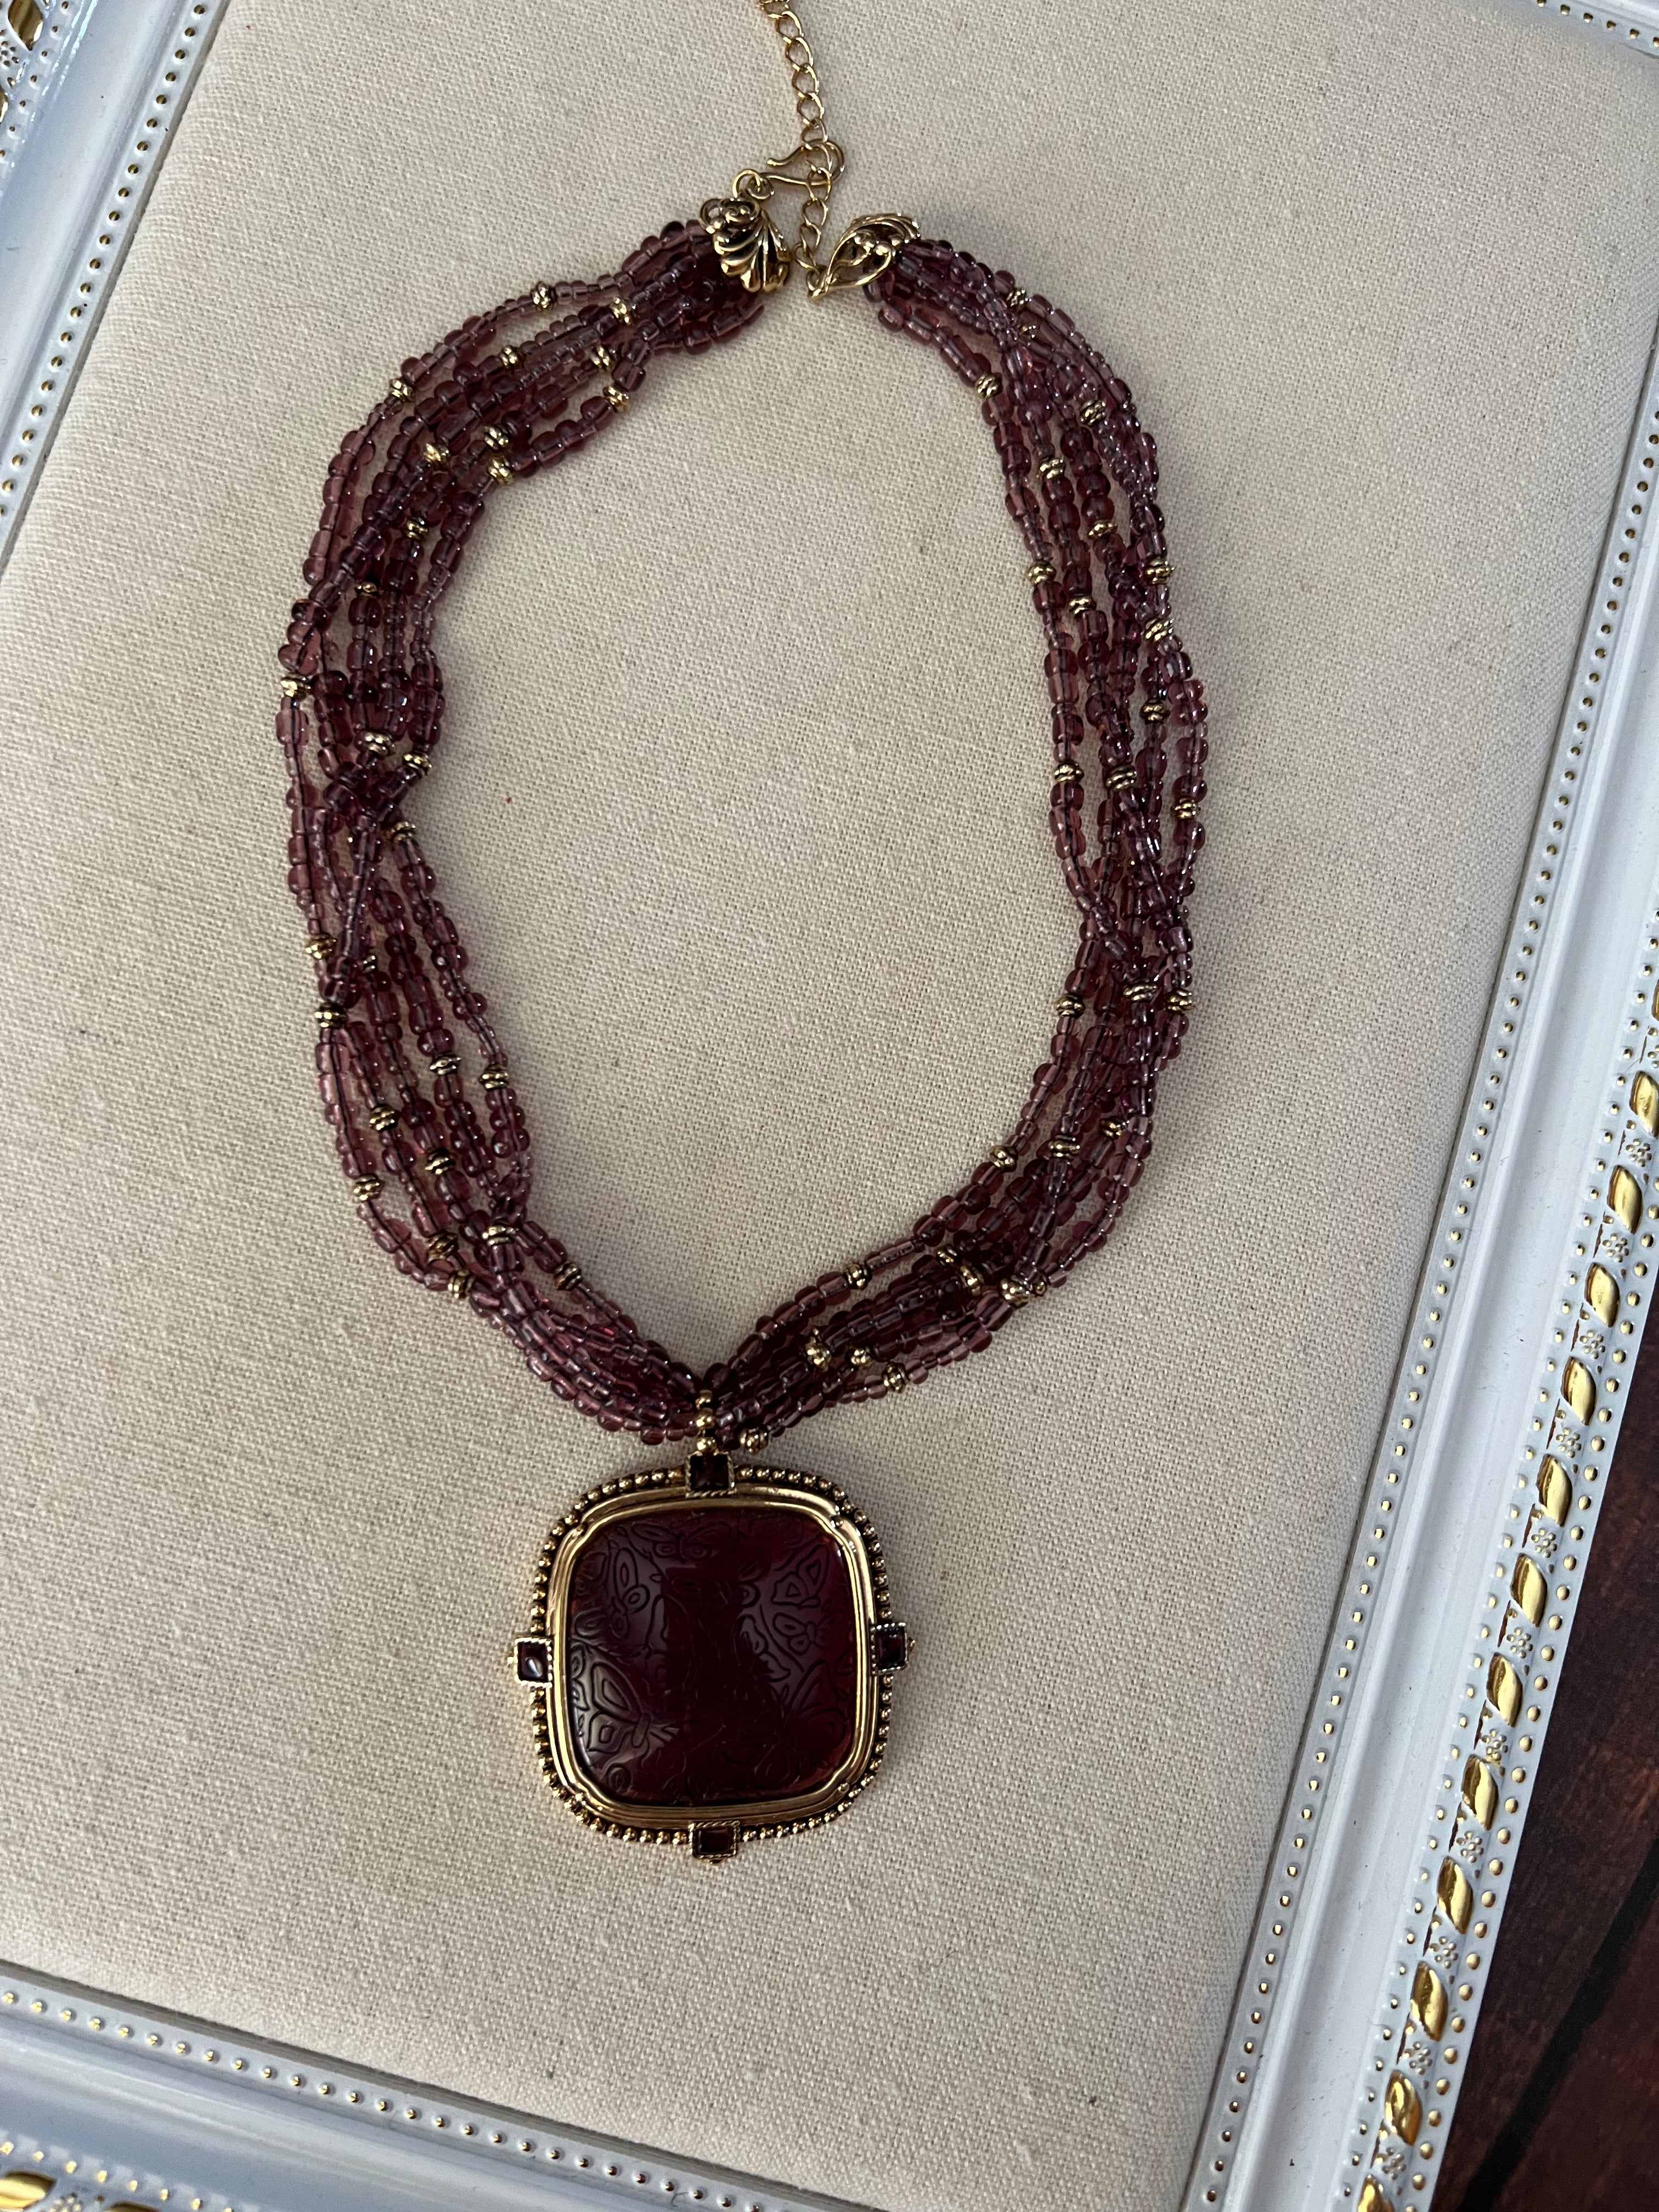 Vintage Monet Beaded Necklace